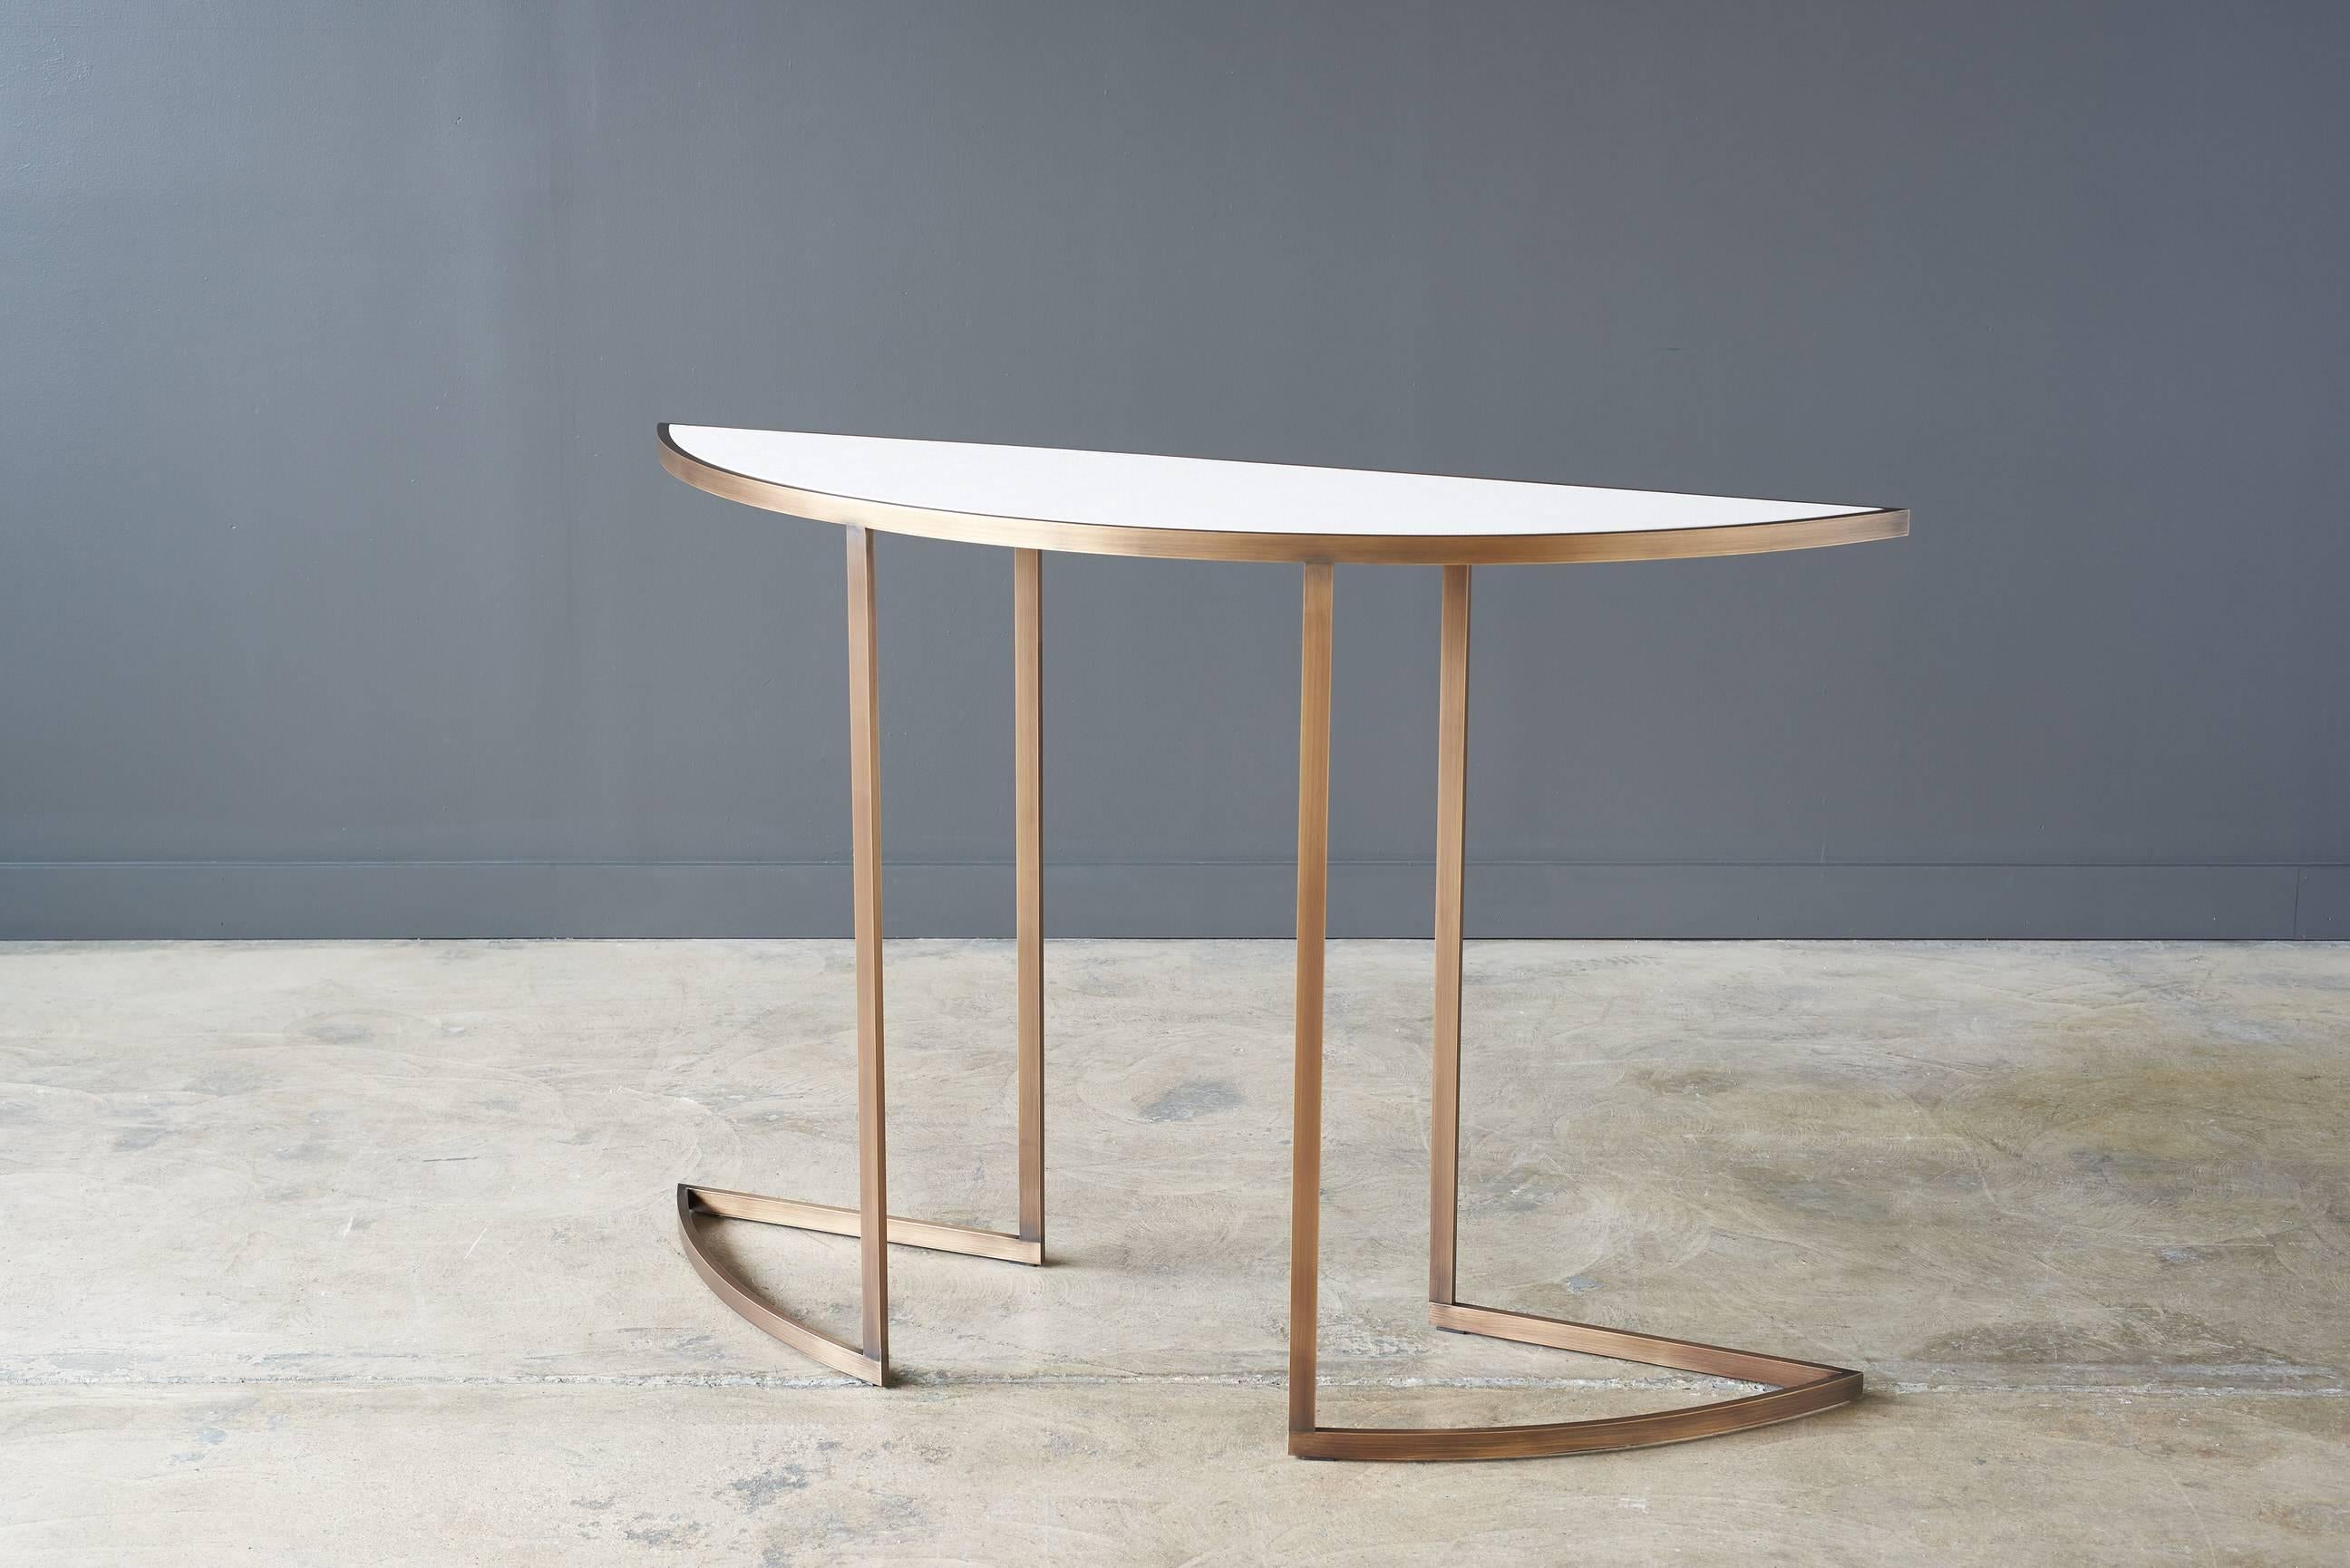 Our modern, half-moon-shaped Bleecker demilune console is a functional art piece with thoughtful handcrafted design. A well combination of simplicity and elegance to add style to any home.

Available in matte brass and innovations Tuscan sand